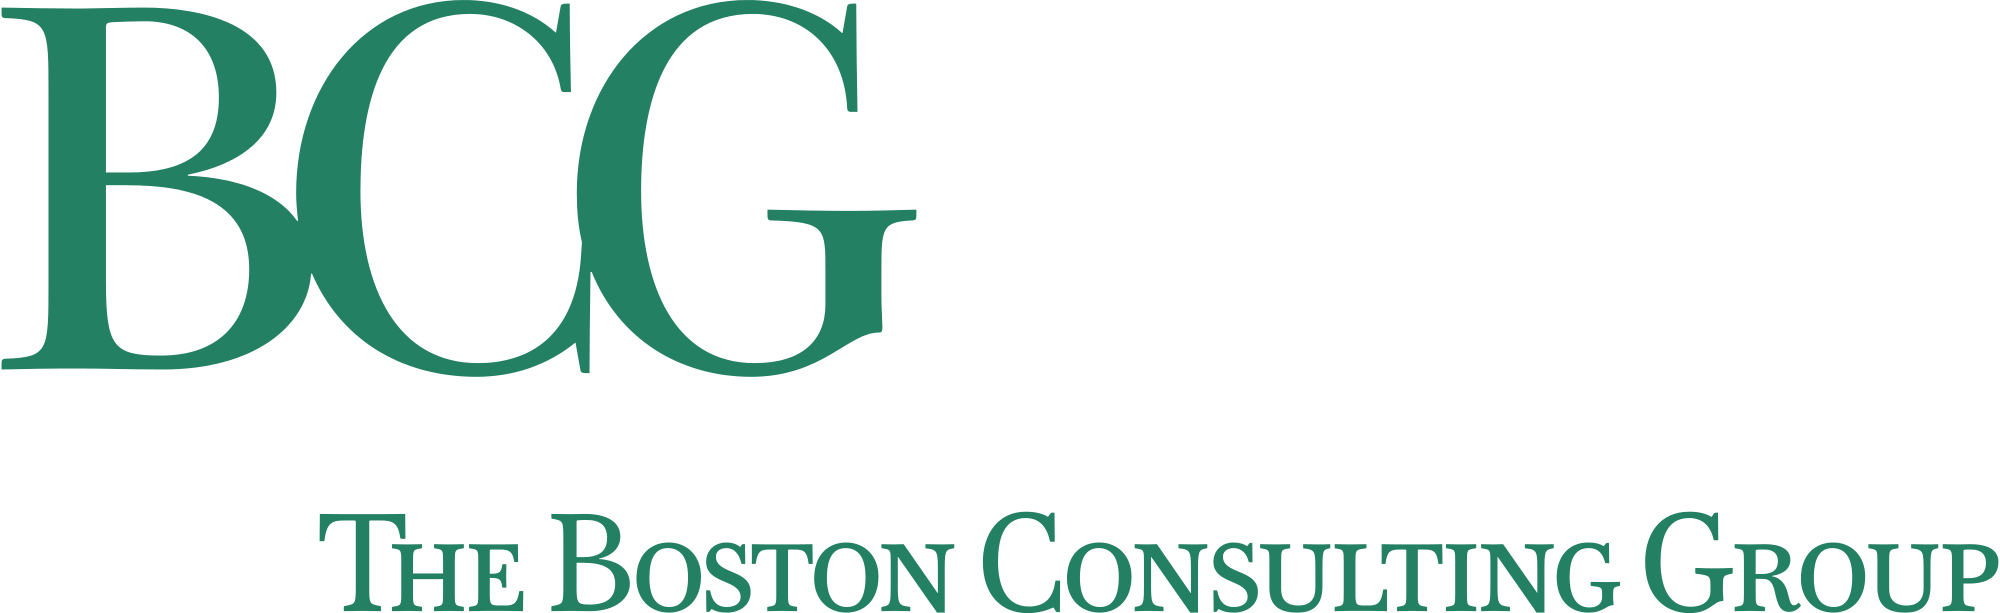 boston consulting group phd